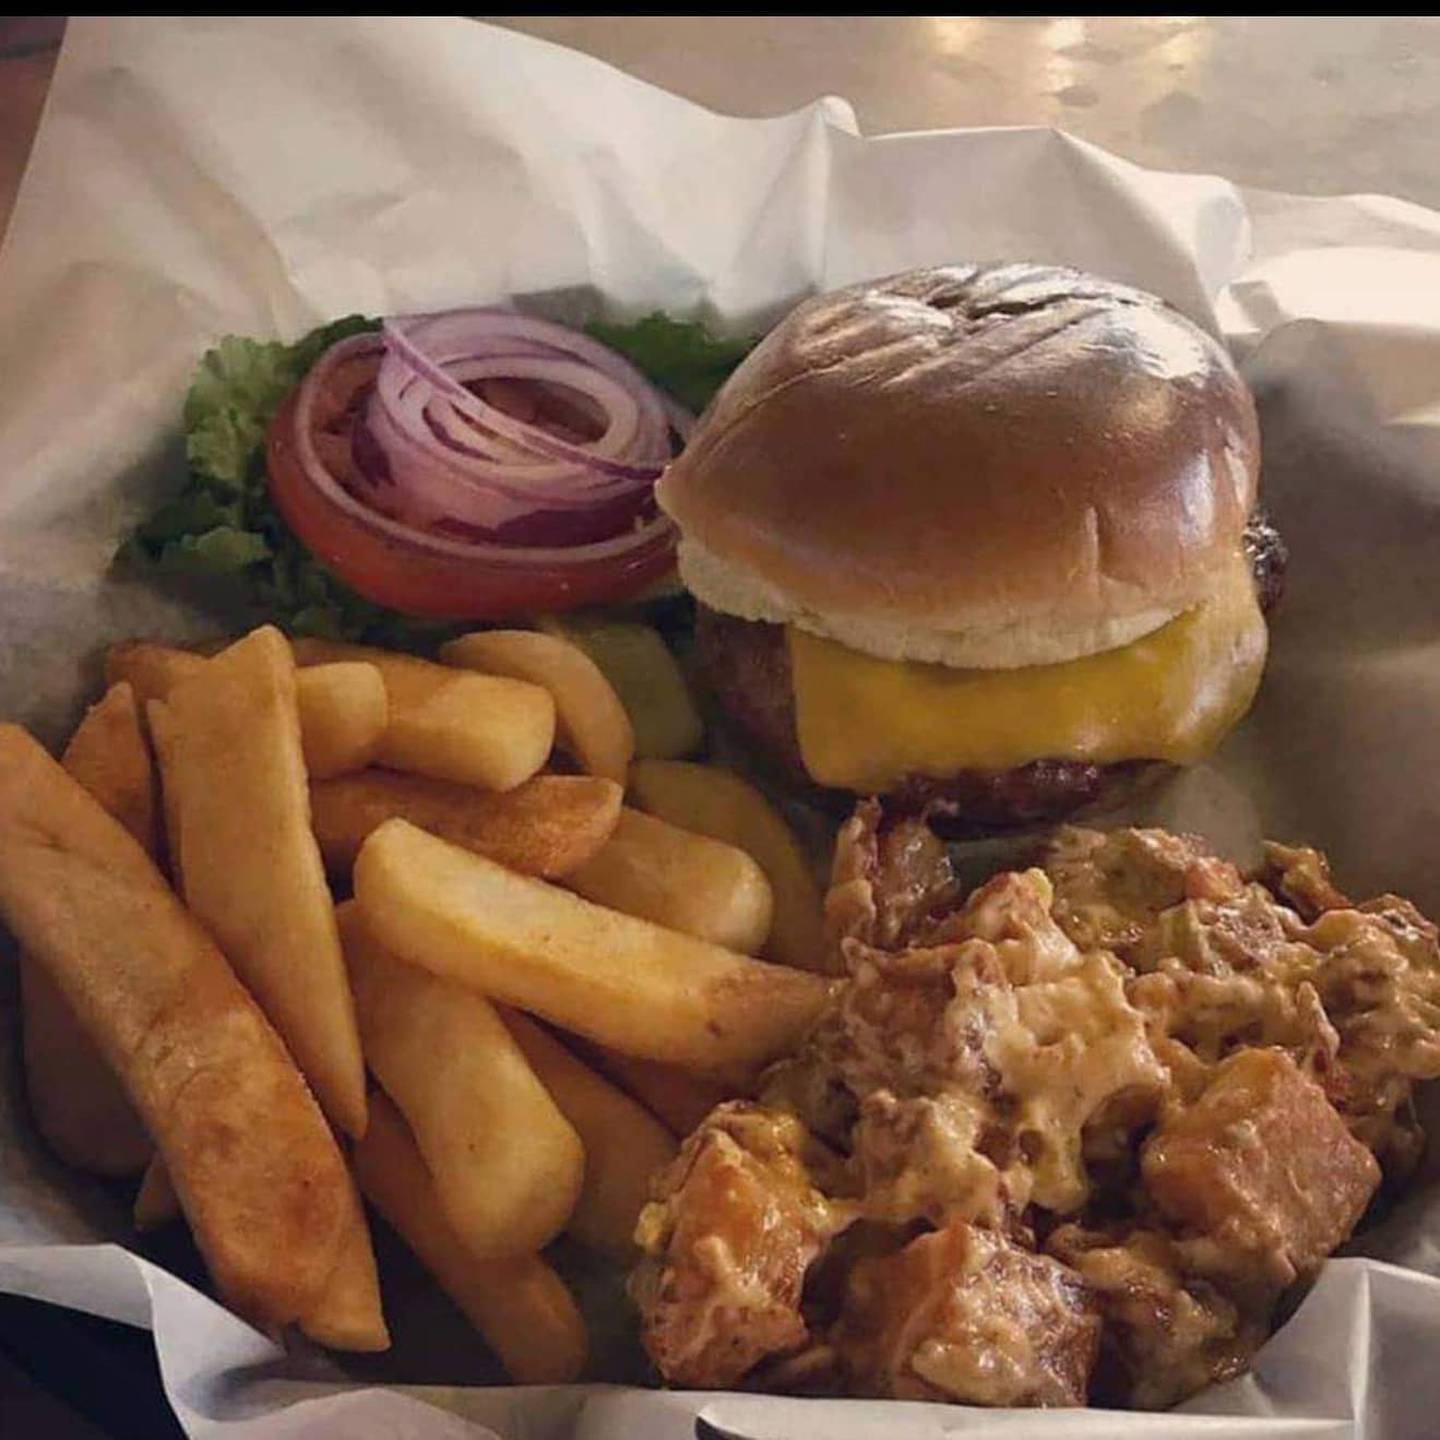 Fatty's Pub and Grille in DeKalb was named in the top 10 burger places in DeKalb County by readers in 2021.